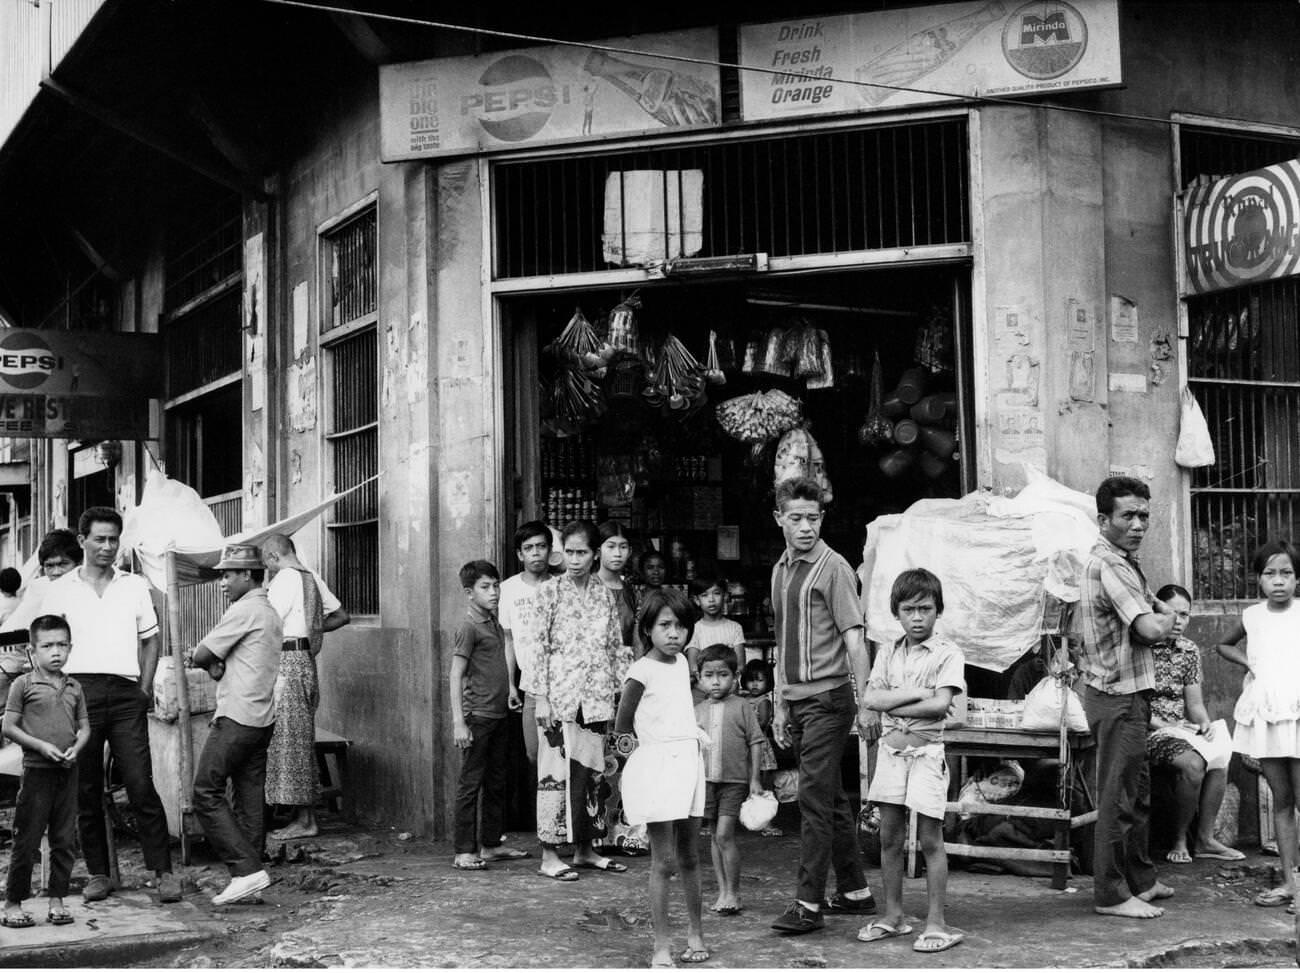 Street scenes in Jolo, Philippines, with people in front of a grocery shop, 1972.